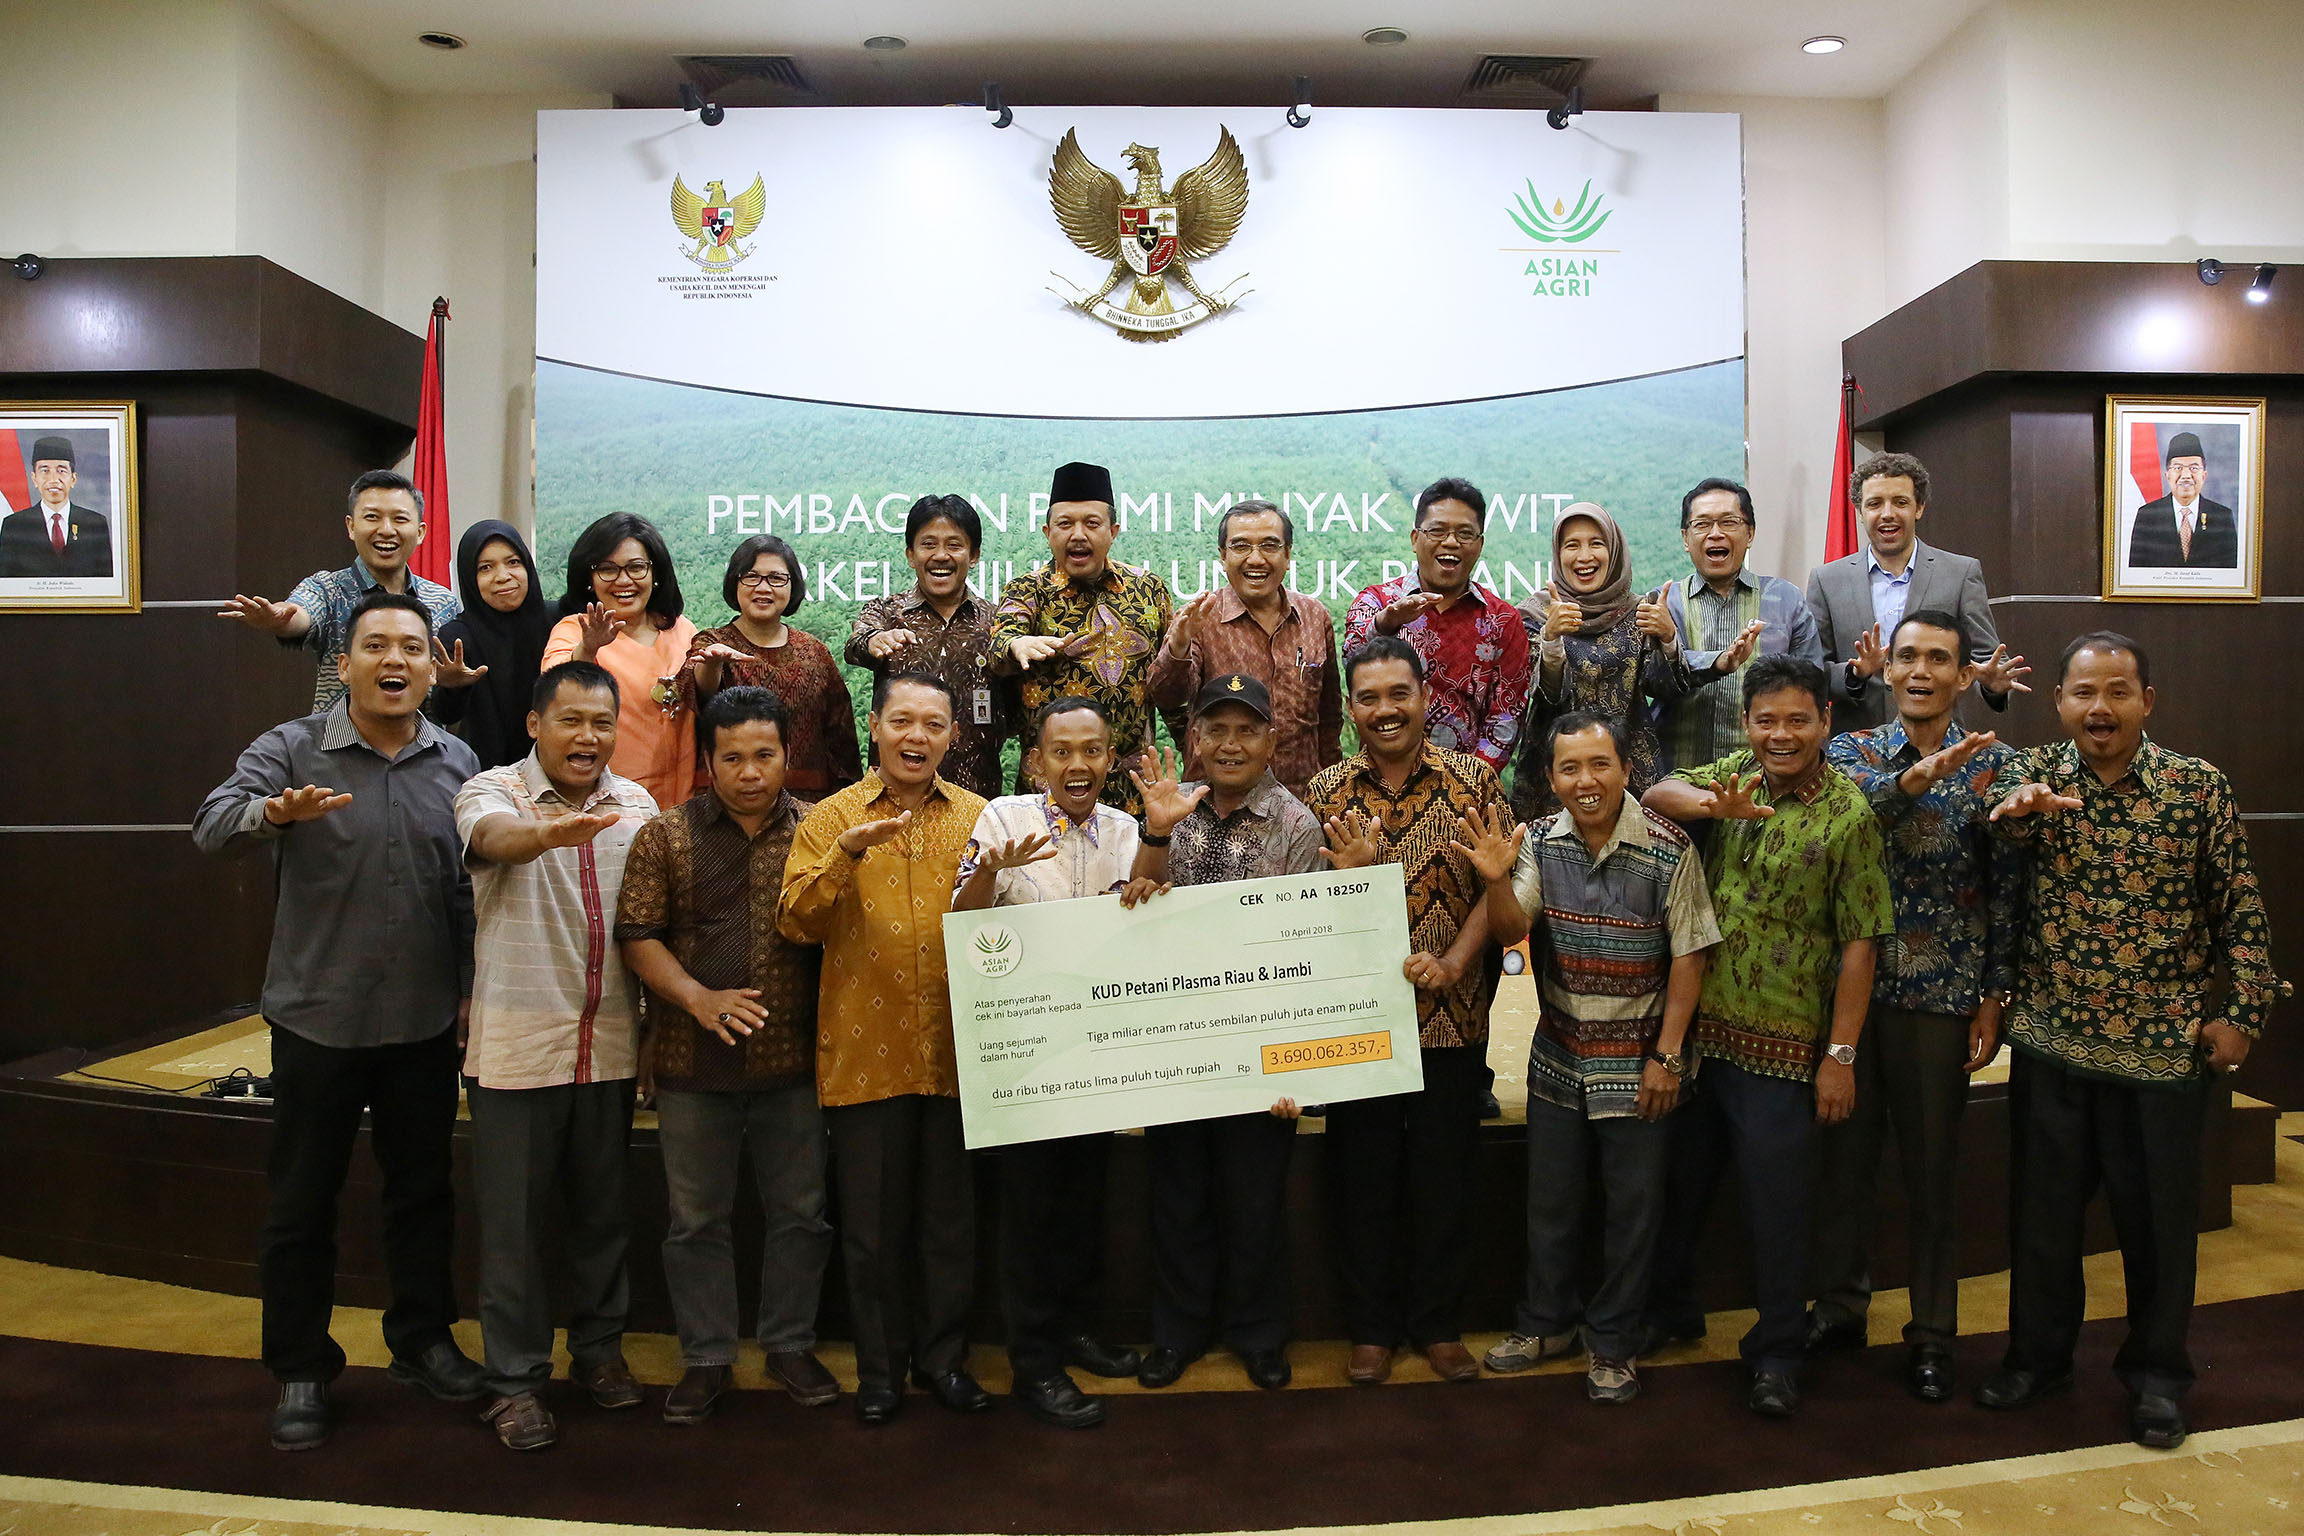 Asian Agri Supports Farmers’ Cooperatives with Palm Oil Premiums